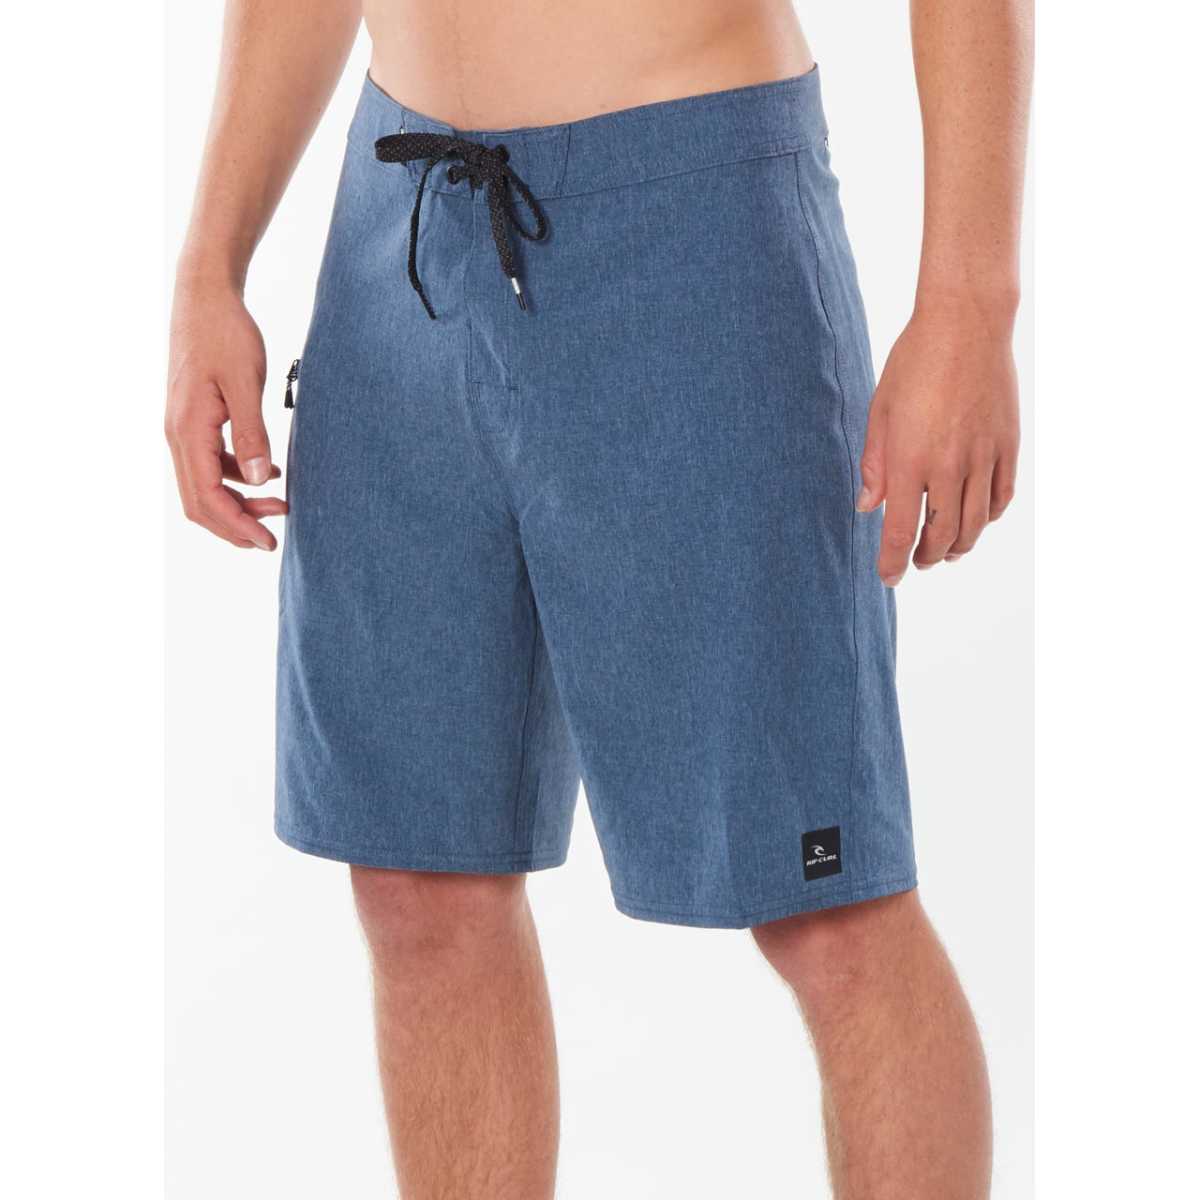 Mirage Core 20" Boardshorts in Navy – South Coast Surf Shops Online